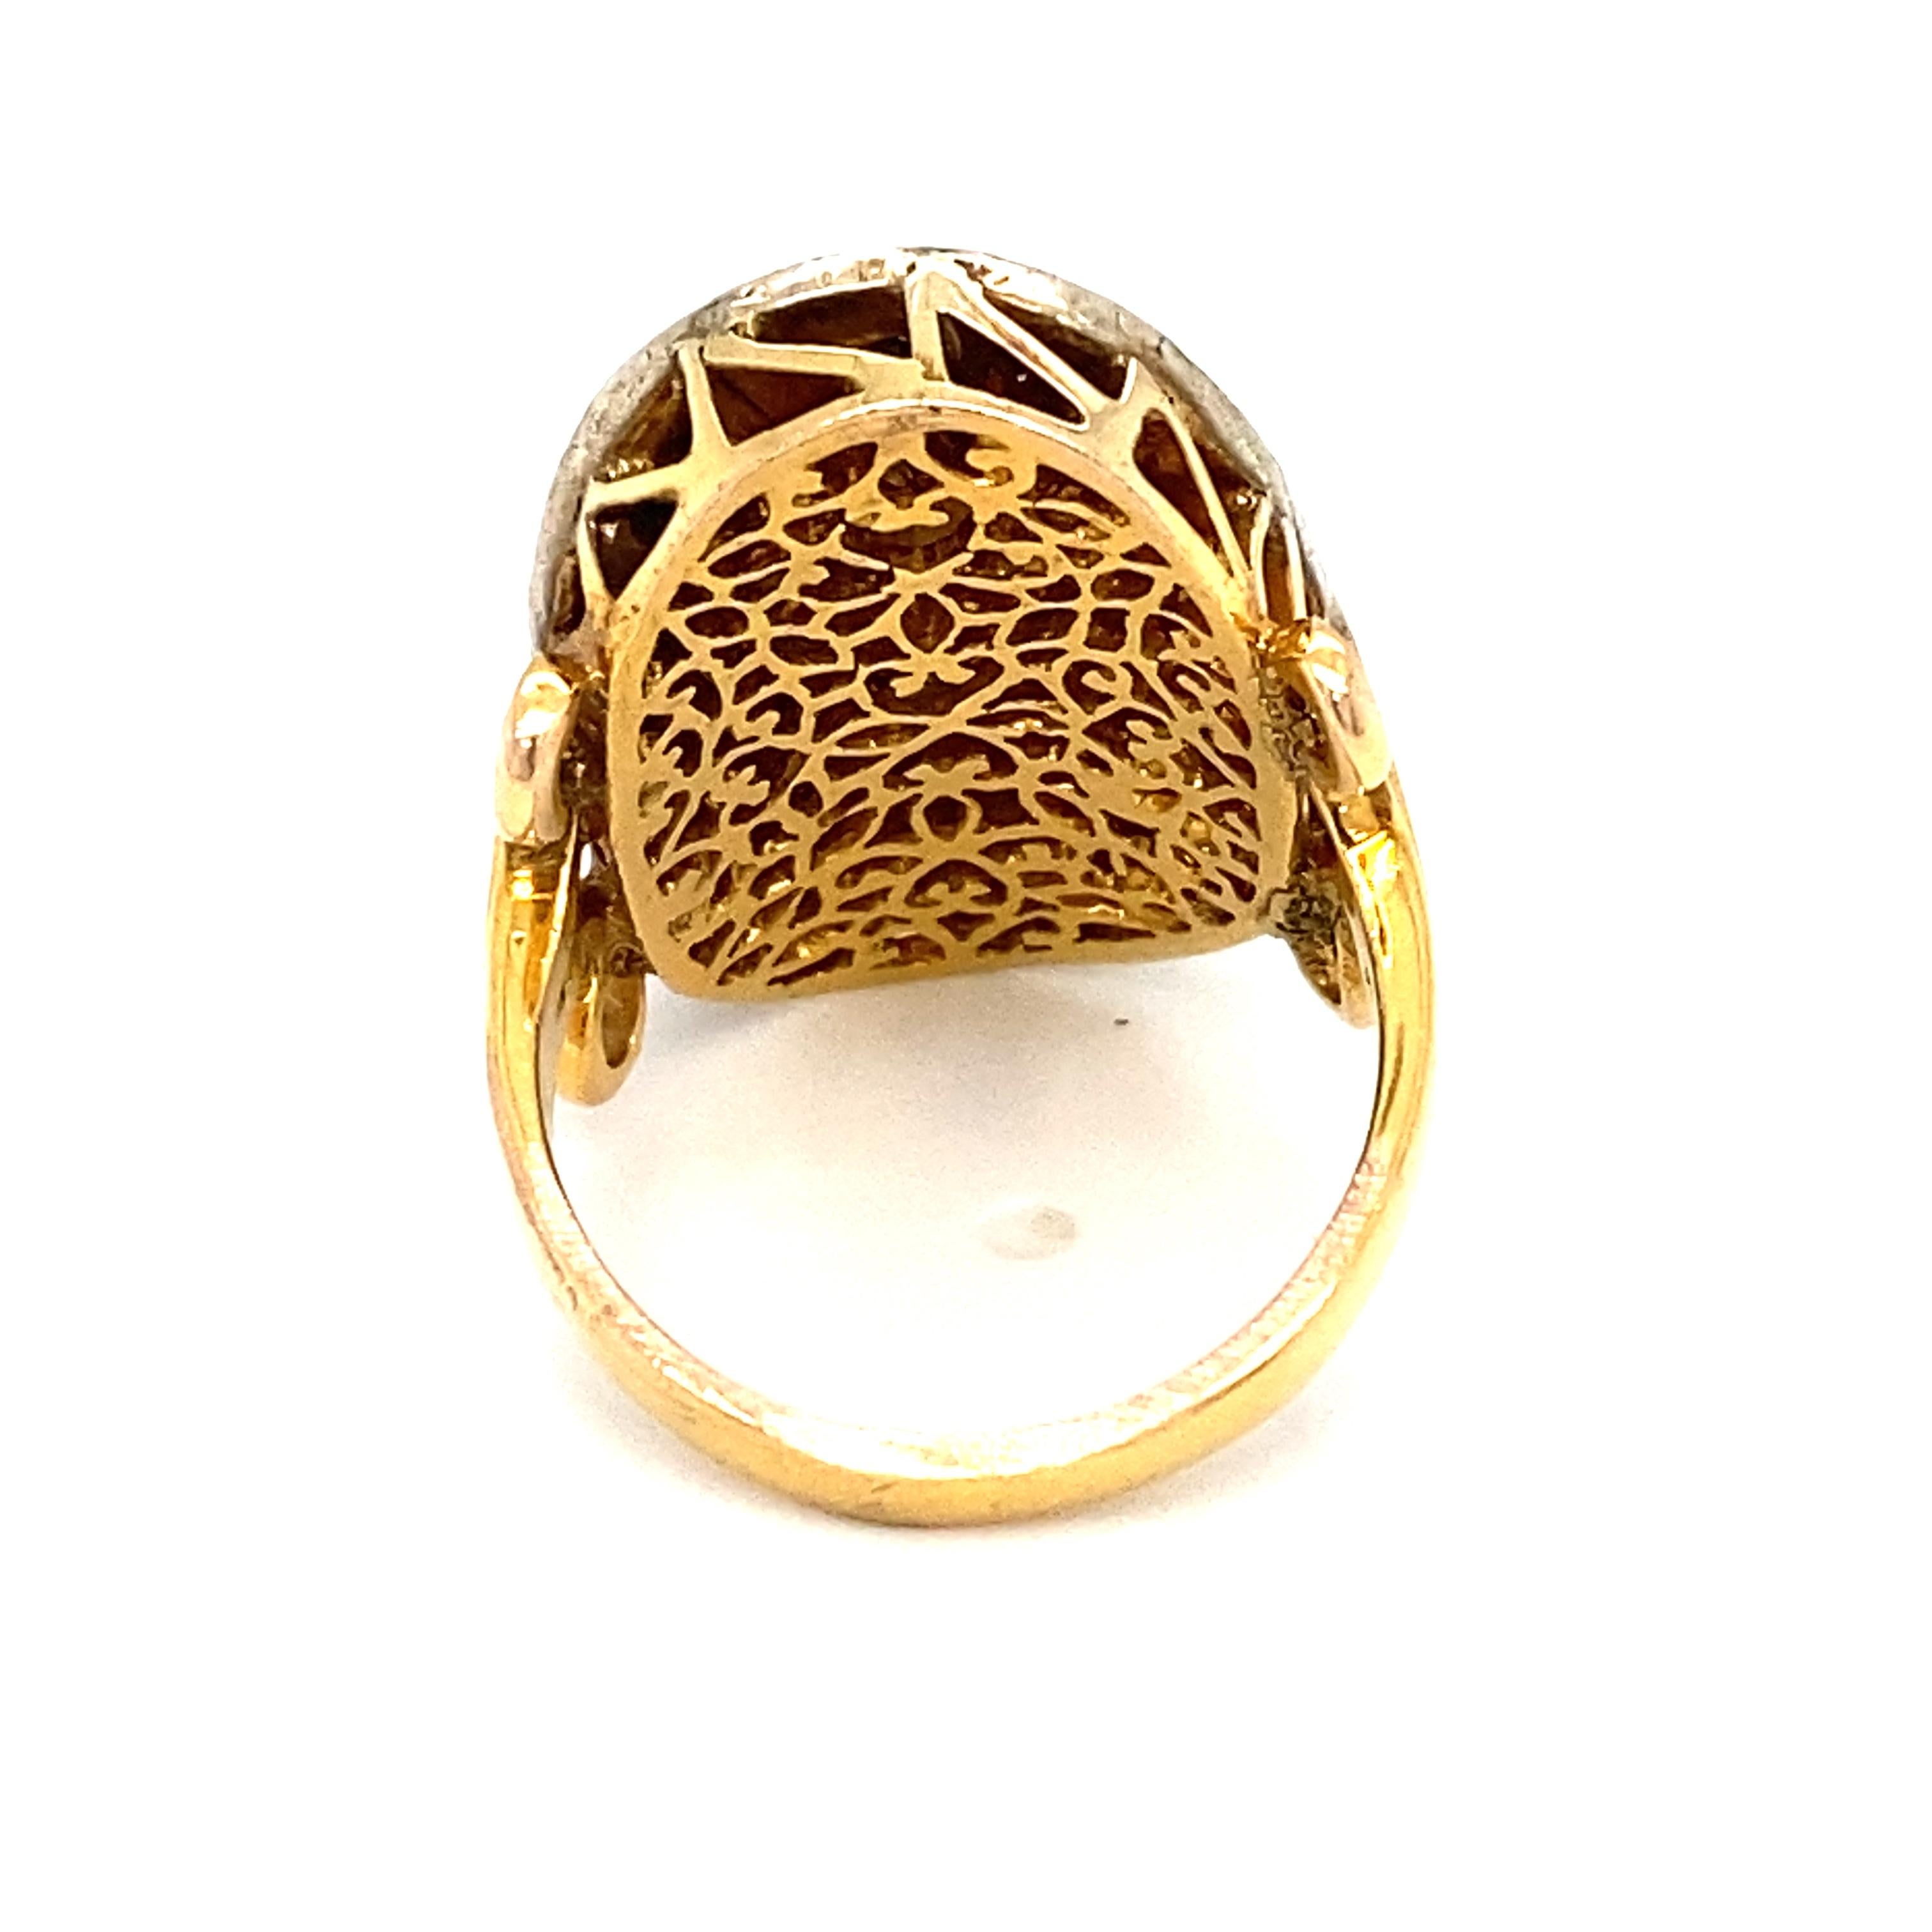 Item Details: This ring is a reproduction of the jewelry popular in the Mughal period of India. It features a foil-backed oblong rose cut diamond in the center with a halo of accent diamonds.

Circa: 2000s
Metal Type: 18k gold
Weight: 7.8g
Size: US